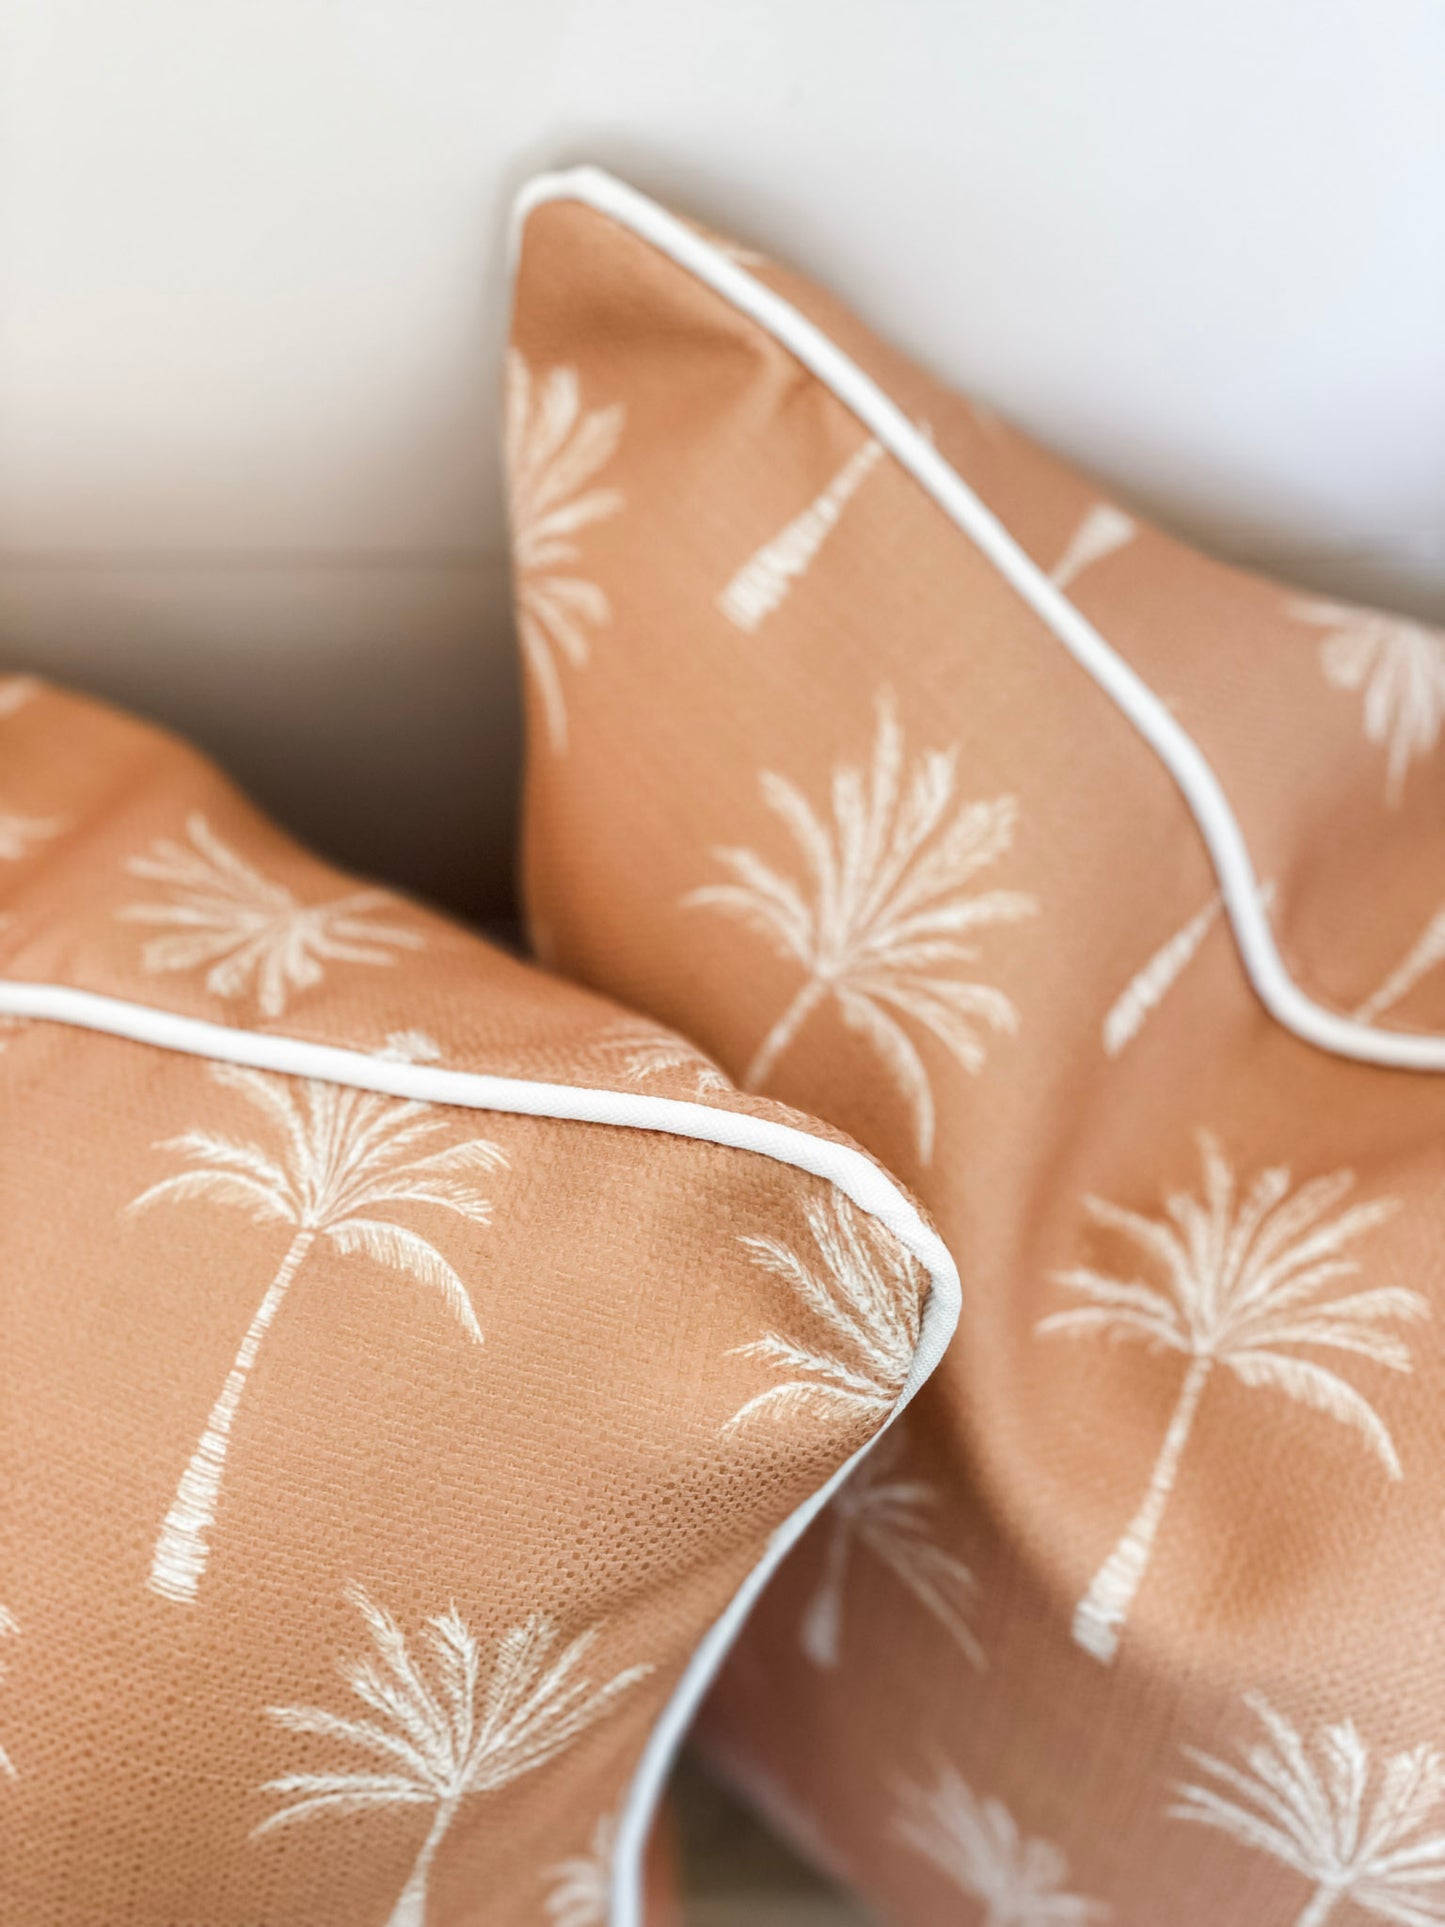 Outdoor Cushion Cover  - Sand Palm